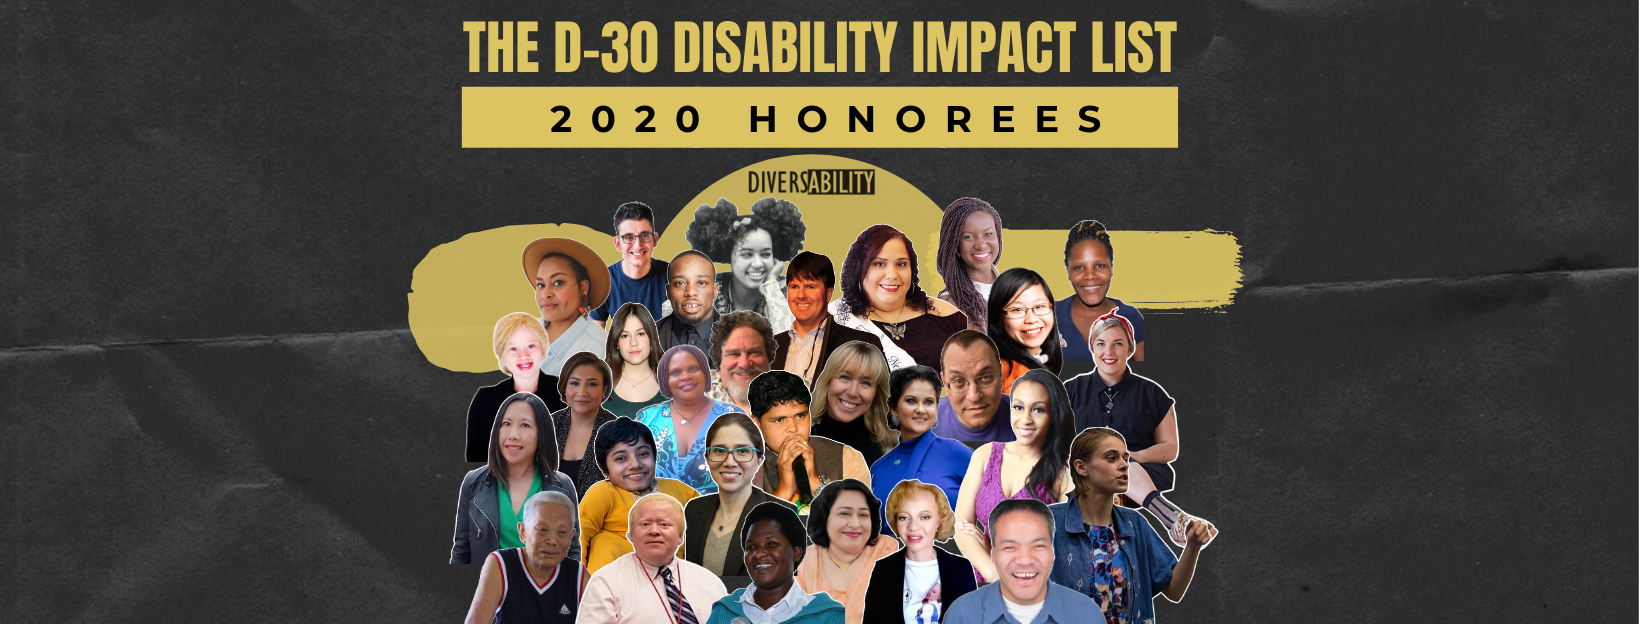 rectangular graphic with a charcoal background. In gold block text, “The D-30 Disability Impact List”. Below, a gold bar with black text, “2020 honorees”. Collage of the headshots of the 30 honorees.